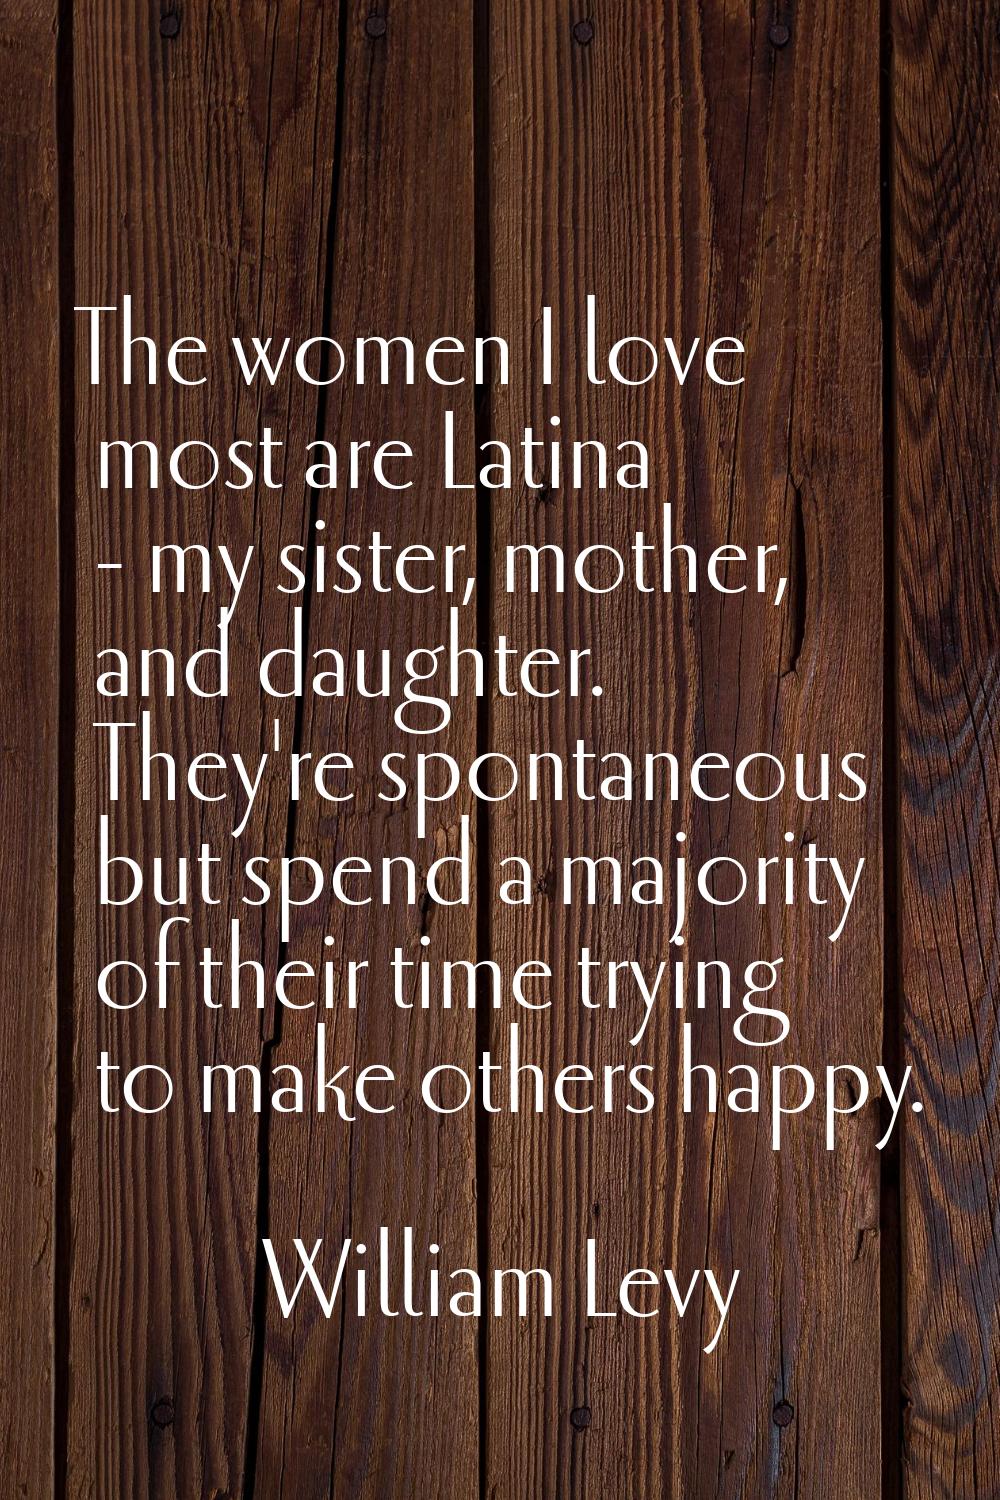 The women I love most are Latina - my sister, mother, and daughter. They're spontaneous but spend a